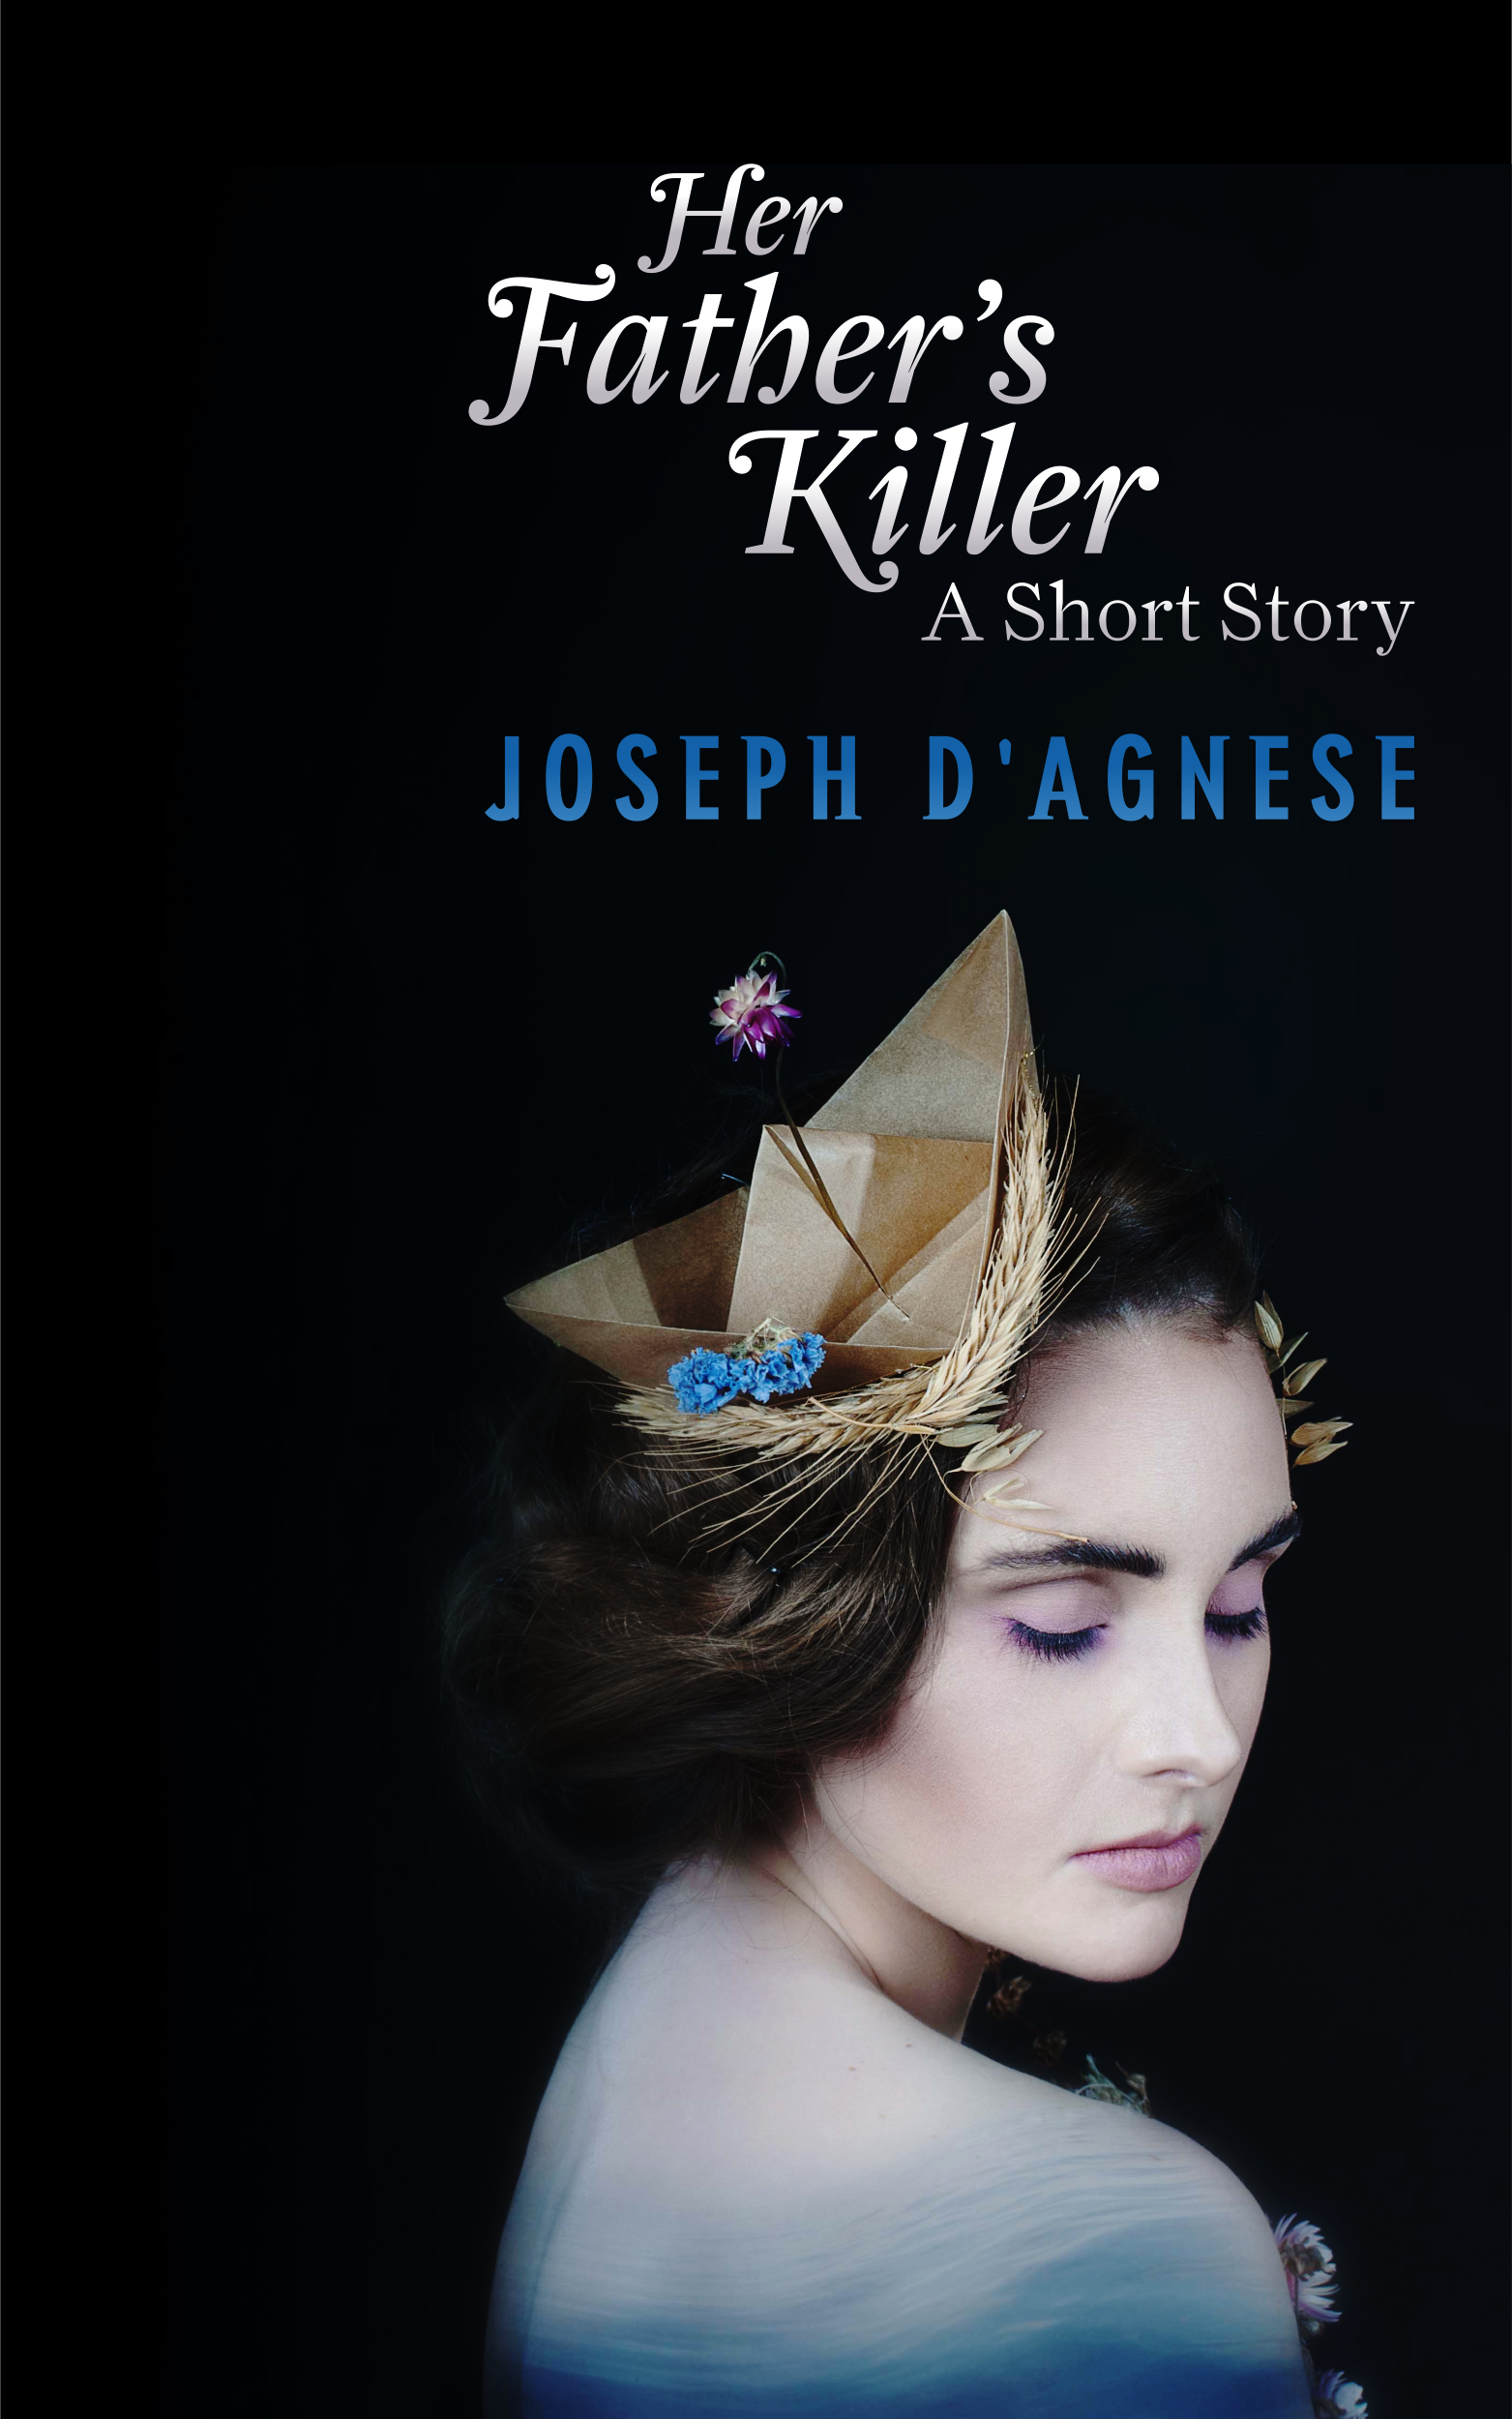 Her Father's Killer by Joseph D'Agnese